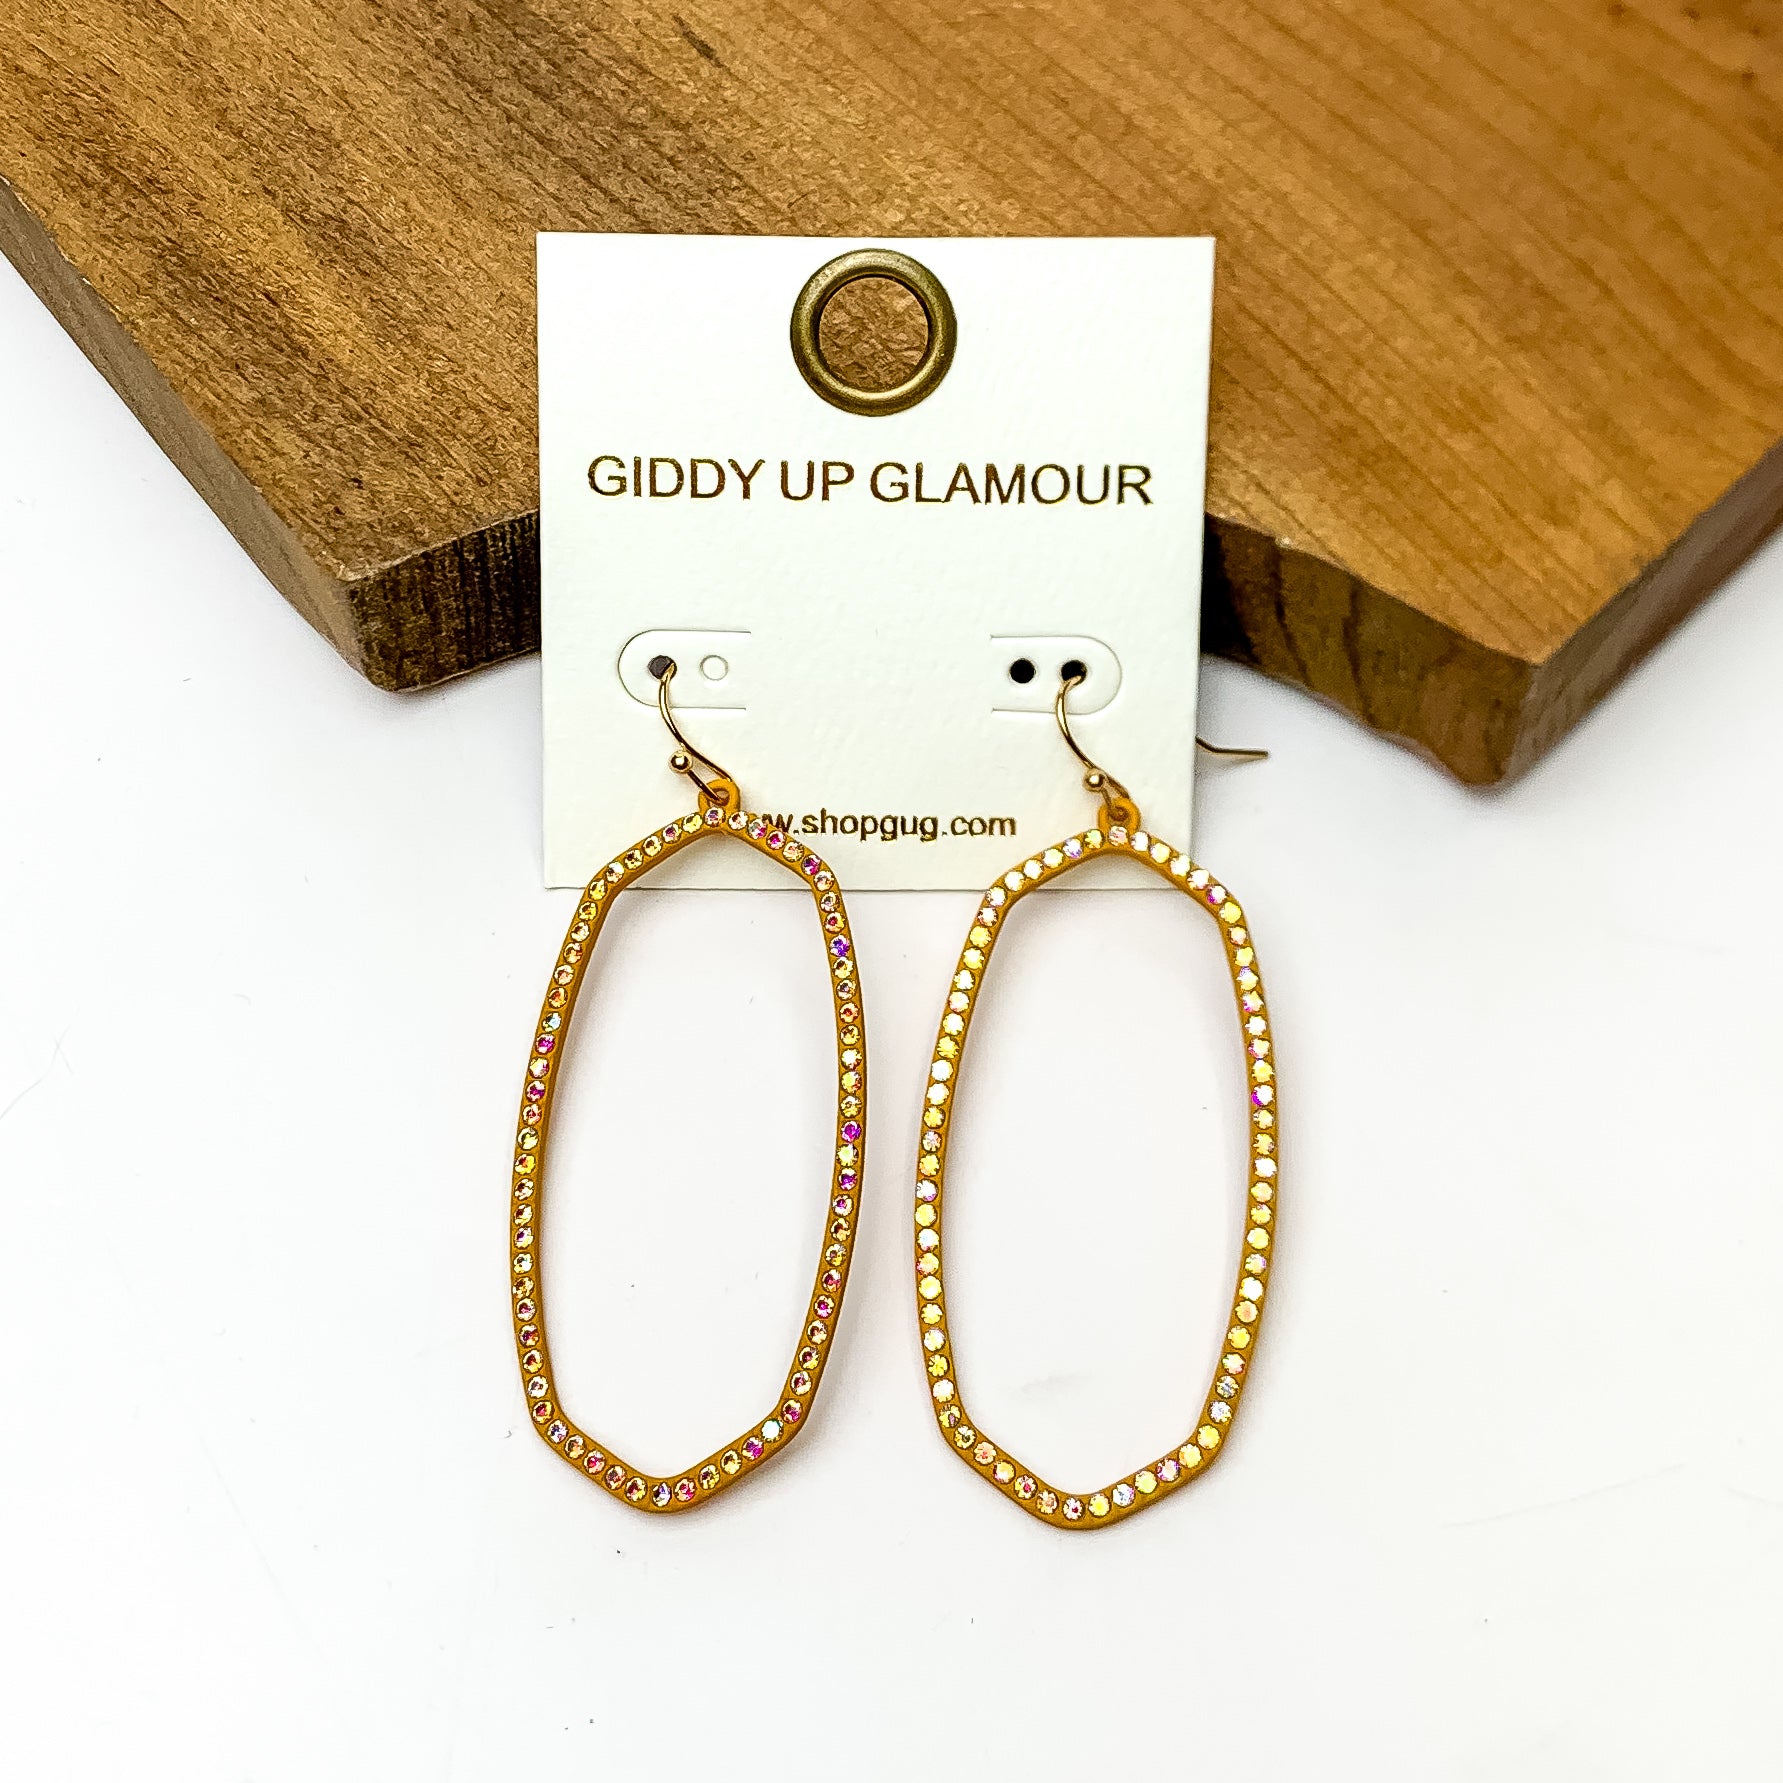 Sparkle Girl Open Oval Earrings in Mustard Yellow. These earrings are pictured laying against a wood piece with a white background.